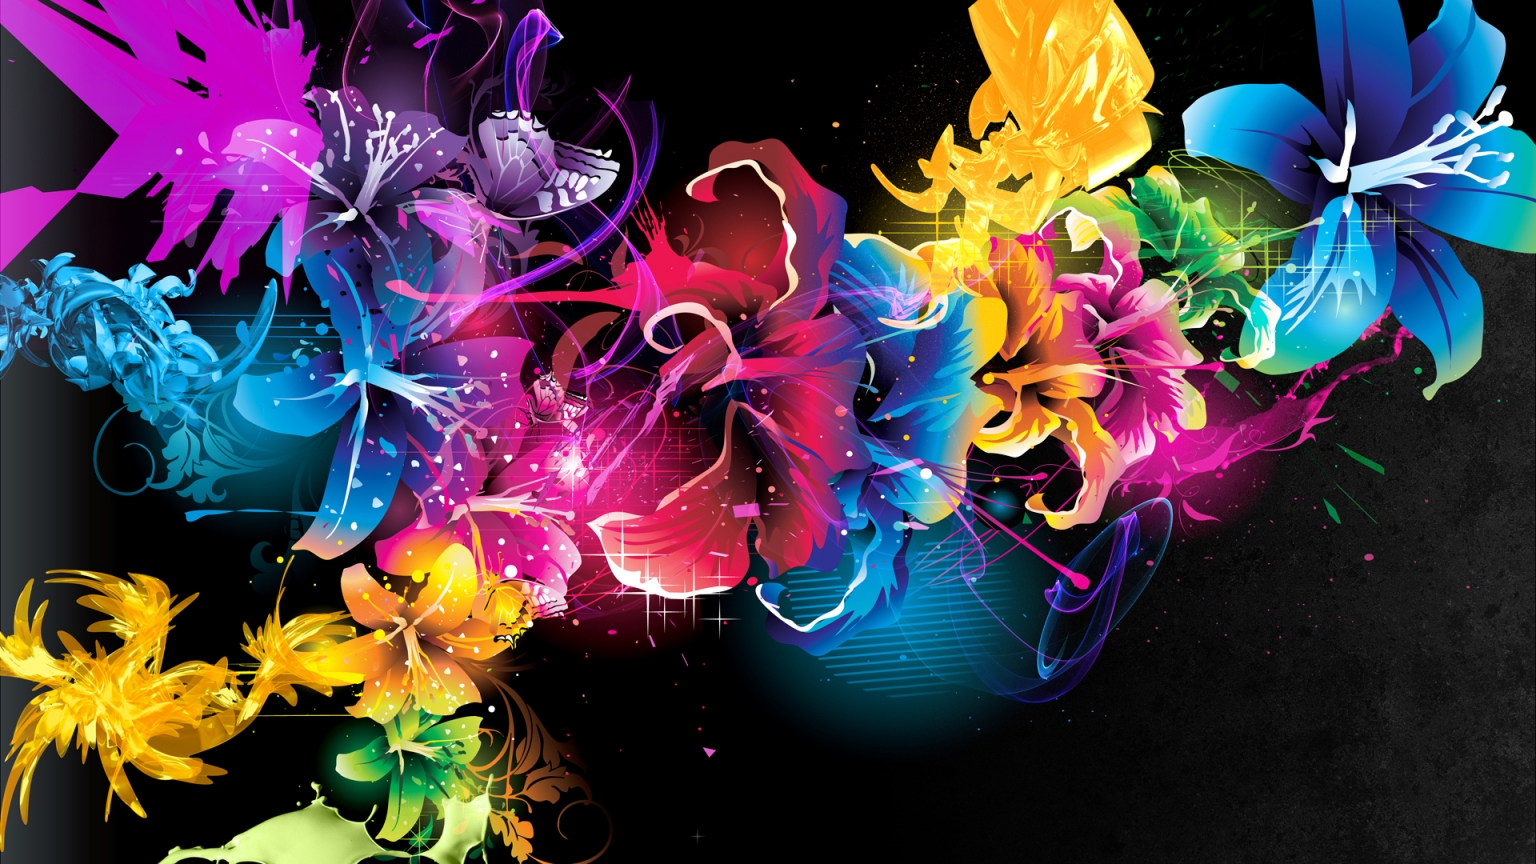 Beautiful Fractal Flowers for 1536 x 864 HDTV resolution